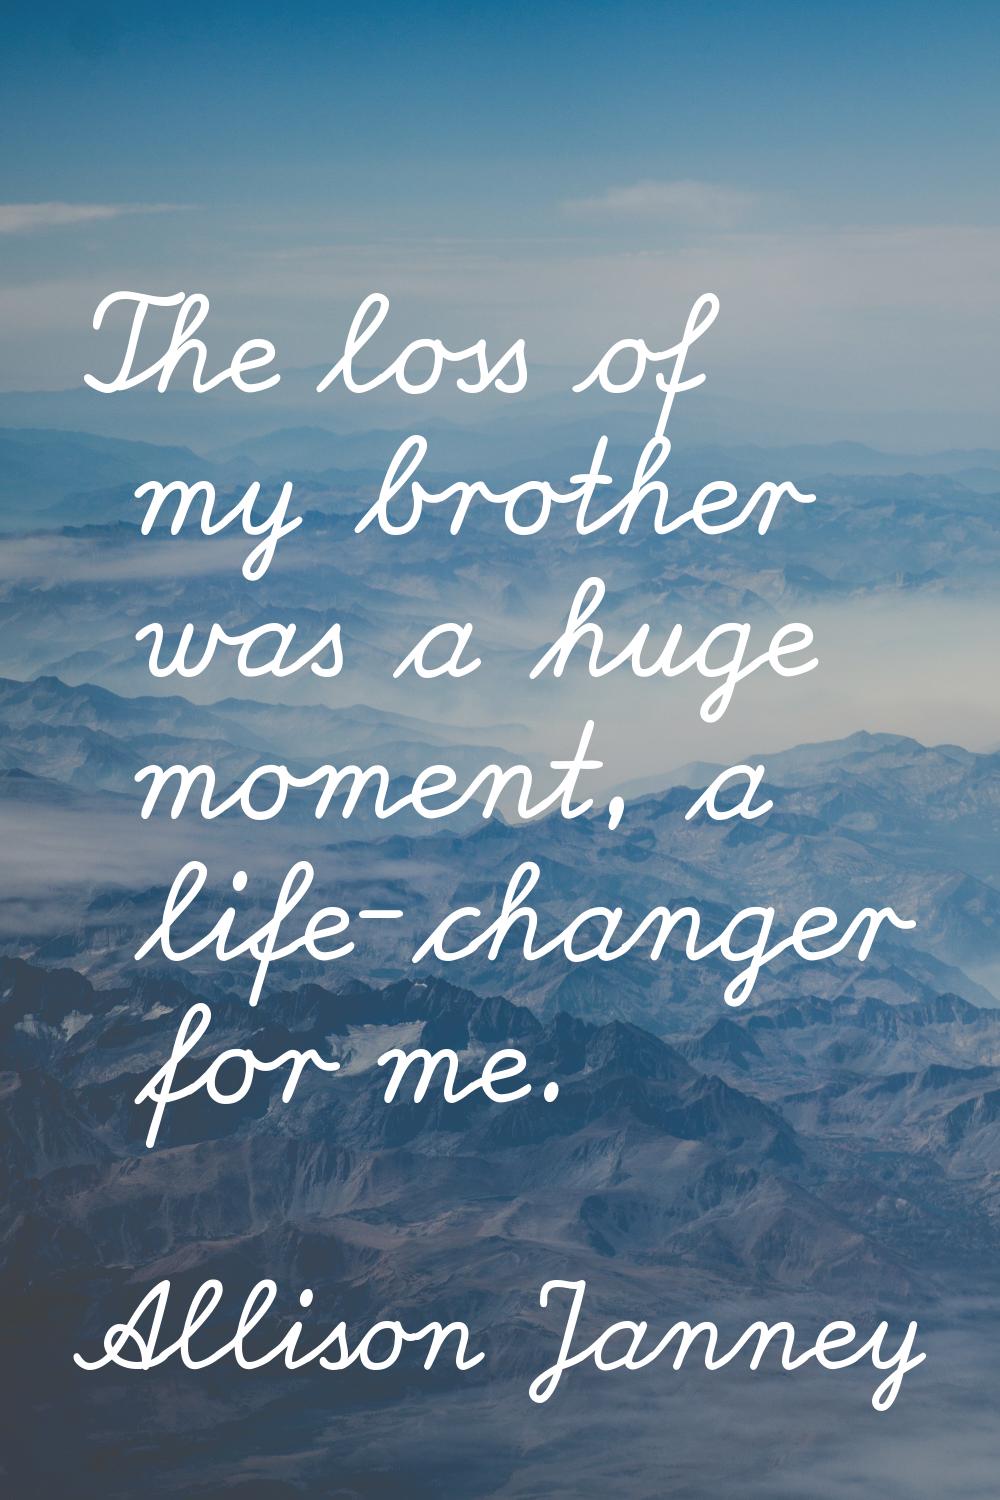 The loss of my brother was a huge moment, a life-changer for me.